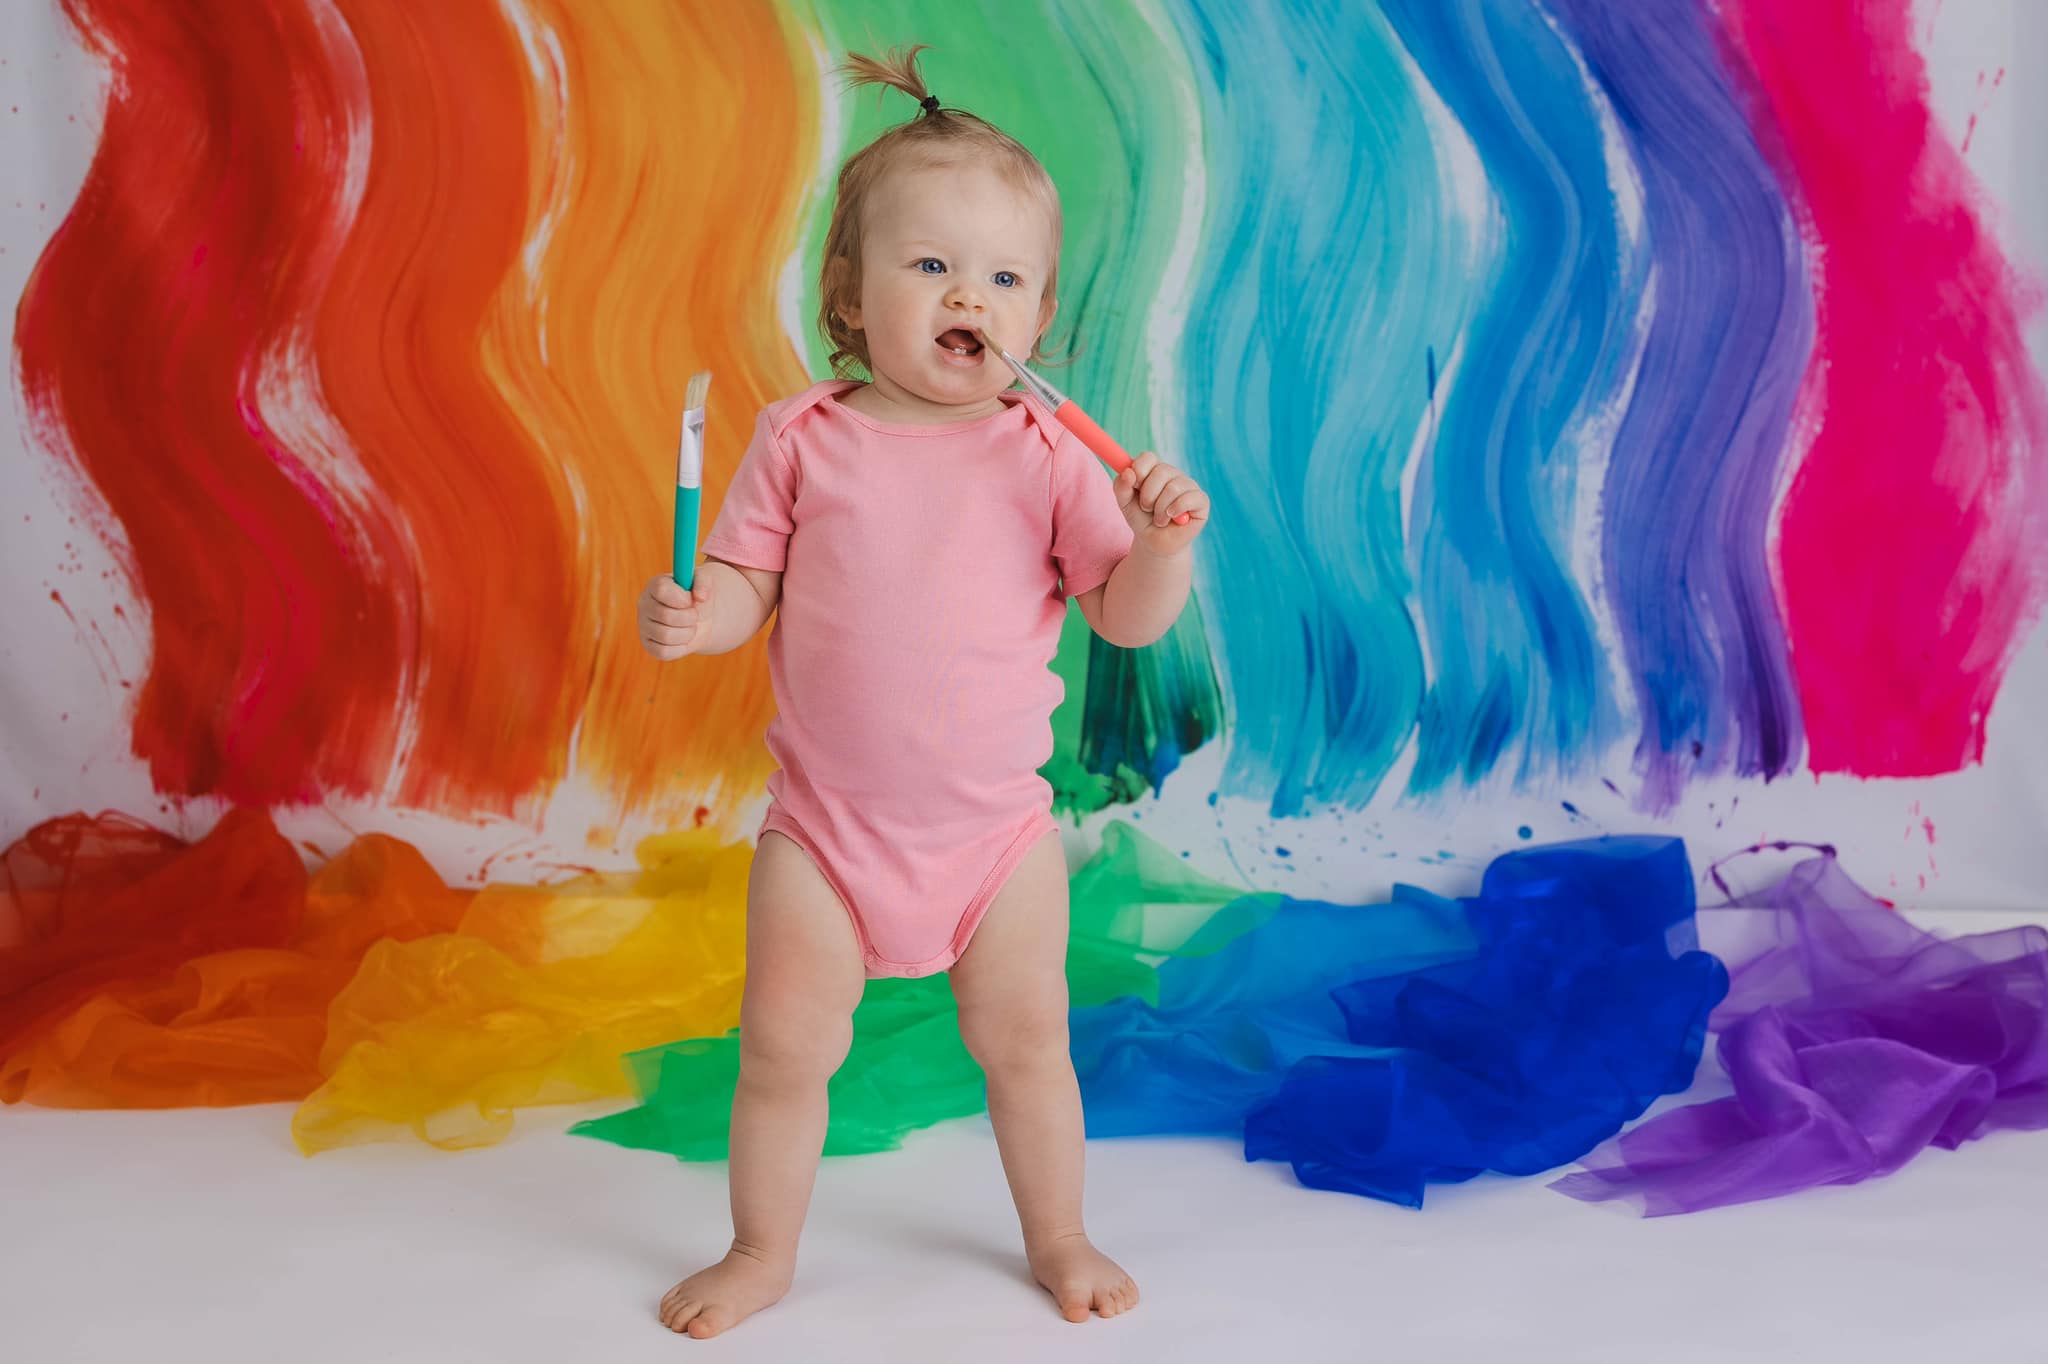 Kate Curvy Rainbow Paint Backdrop for Photography Designed By Erin Larkins